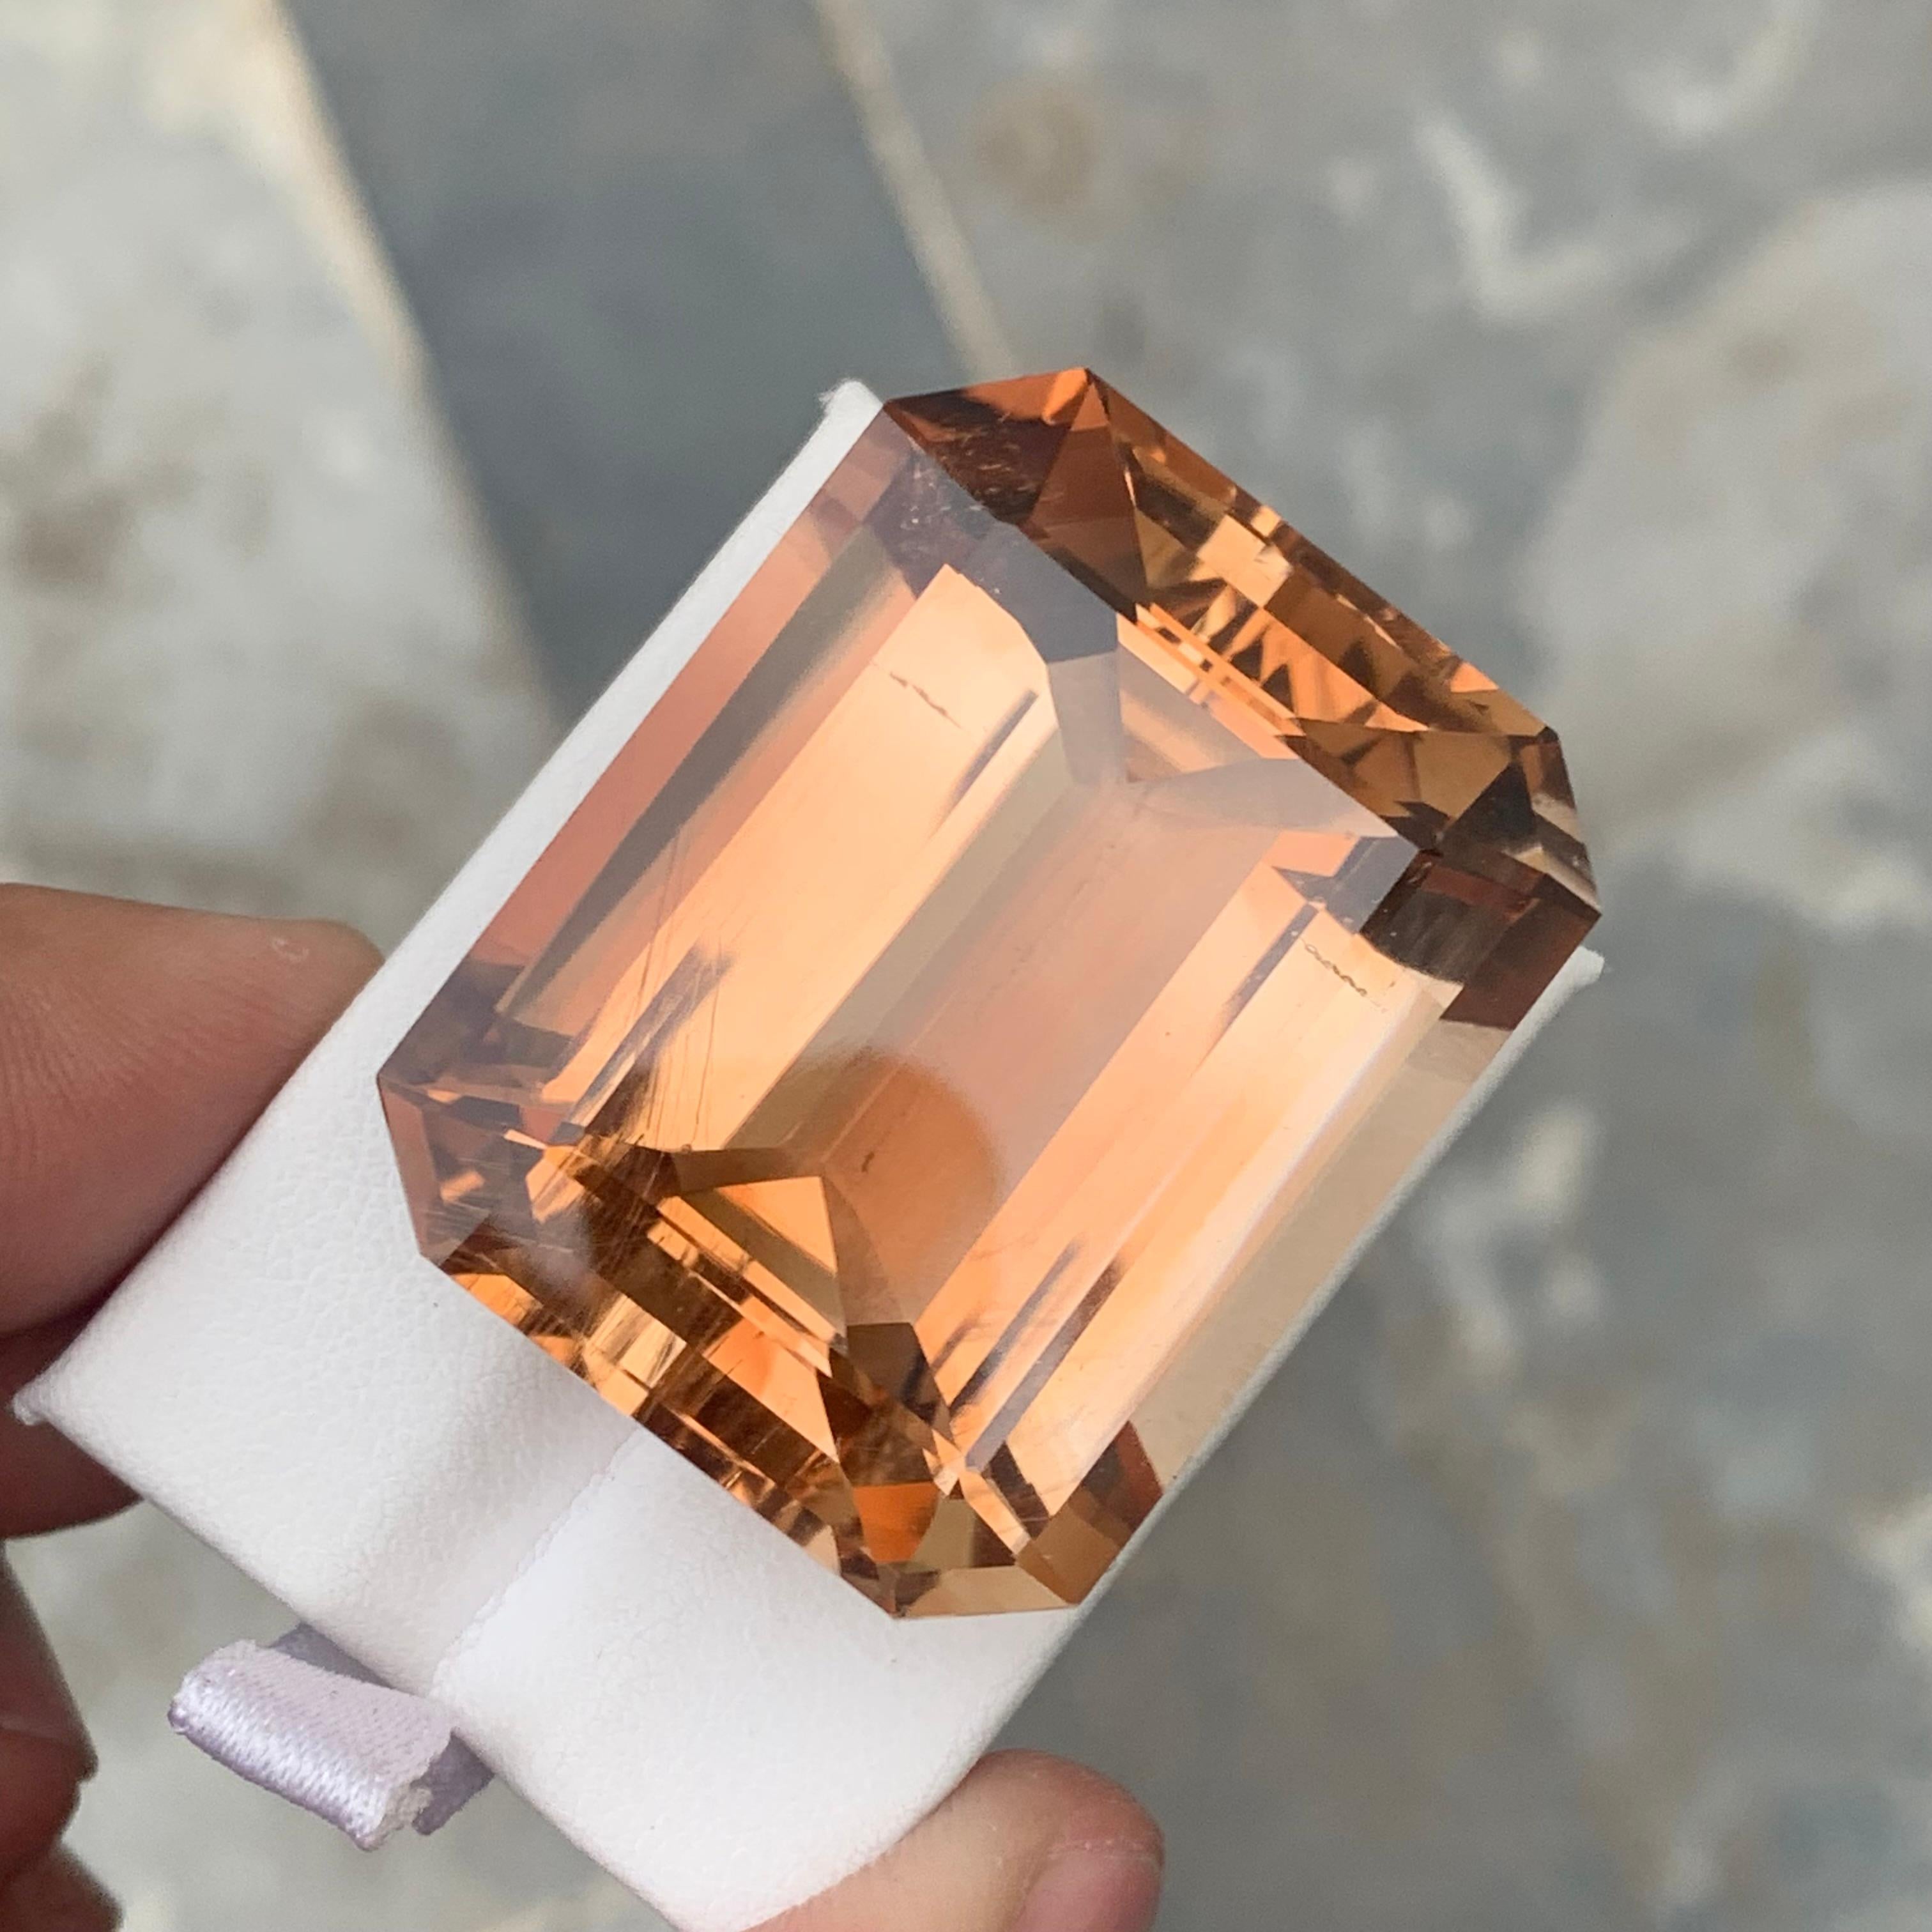 Gemstone Type : Topaz
Weight : 177.25 Carats
Dimensions : 30.7x30x18 mm
Clarity : Eye Clean
Origin : Skardu
Color: Golden
Shape: Emerald
Cut: Emerald
Certificate: On Demand
Month: November
November Birthstone. Those with November birthdays have two